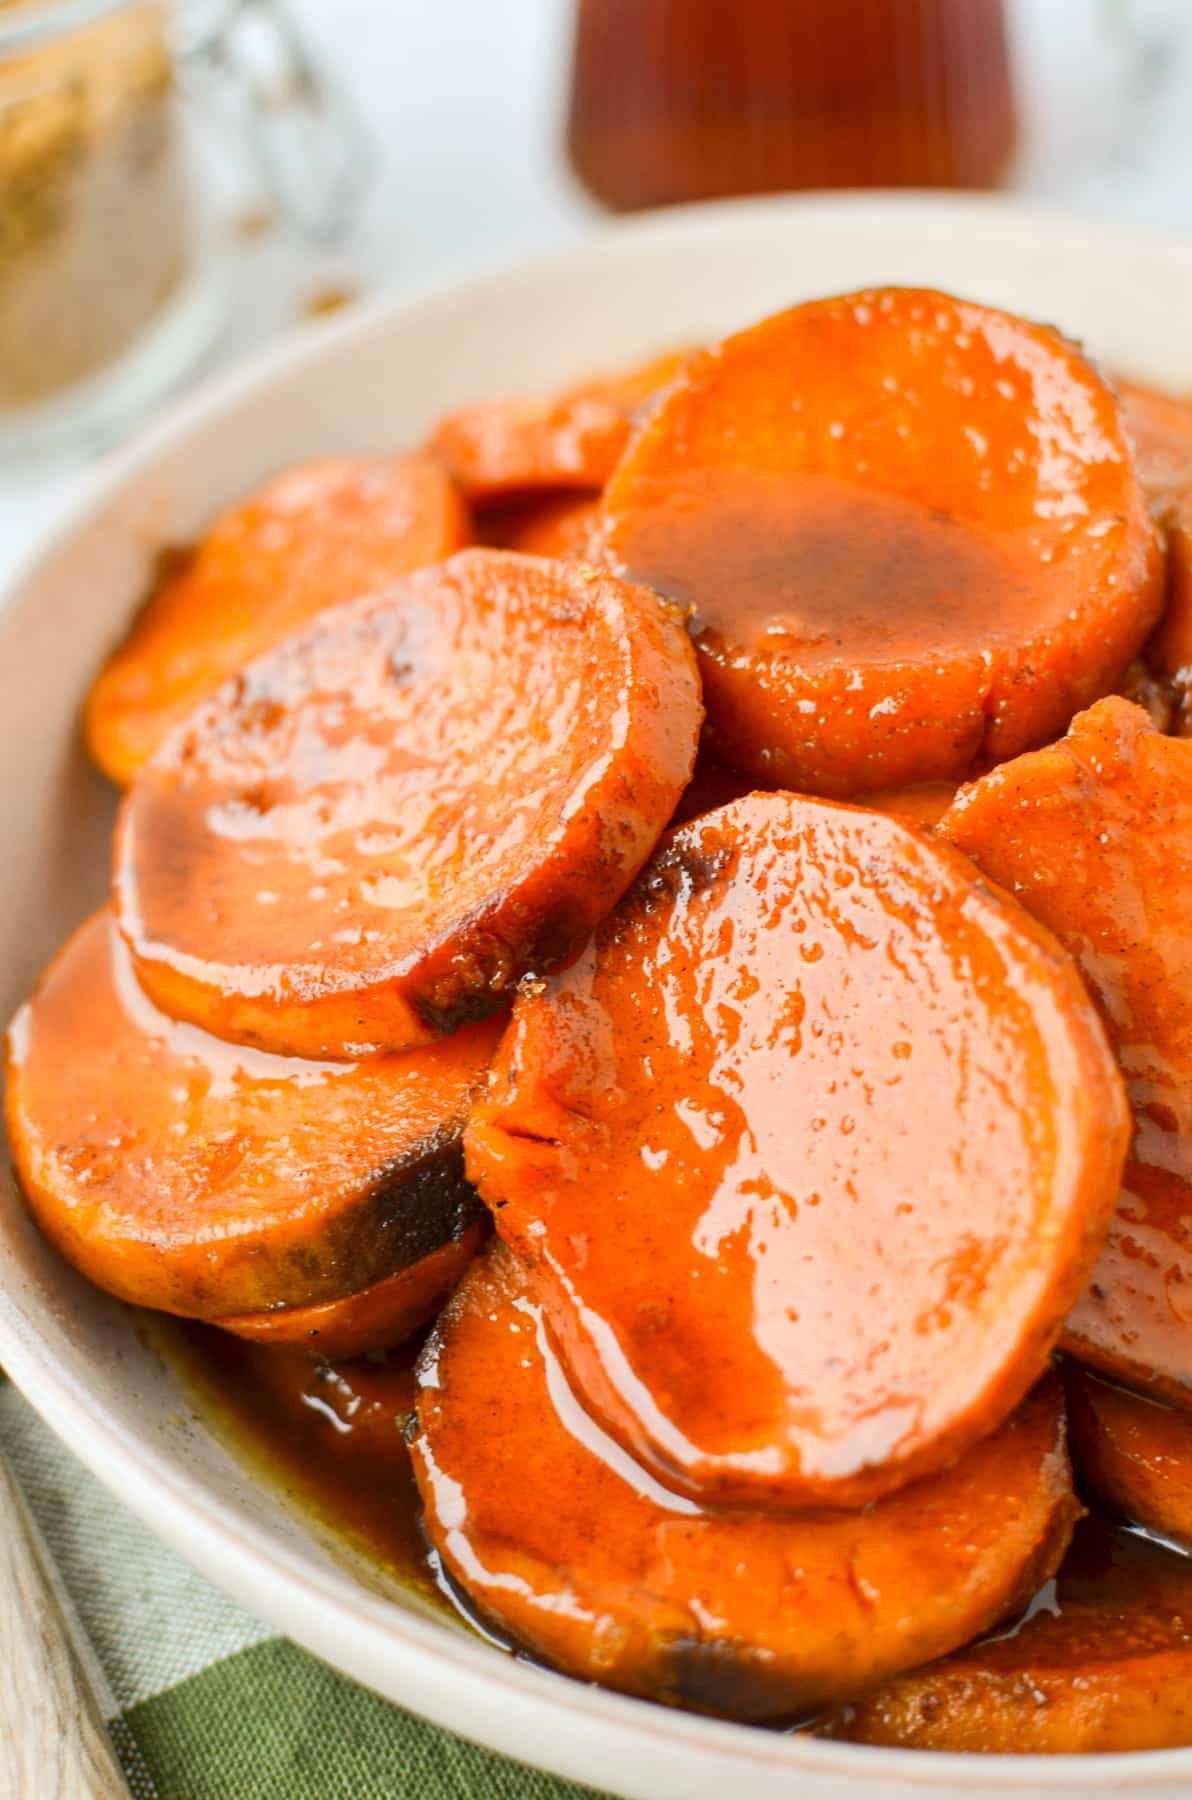 A bowl with sweet potato slices that have been covered in a glaze.